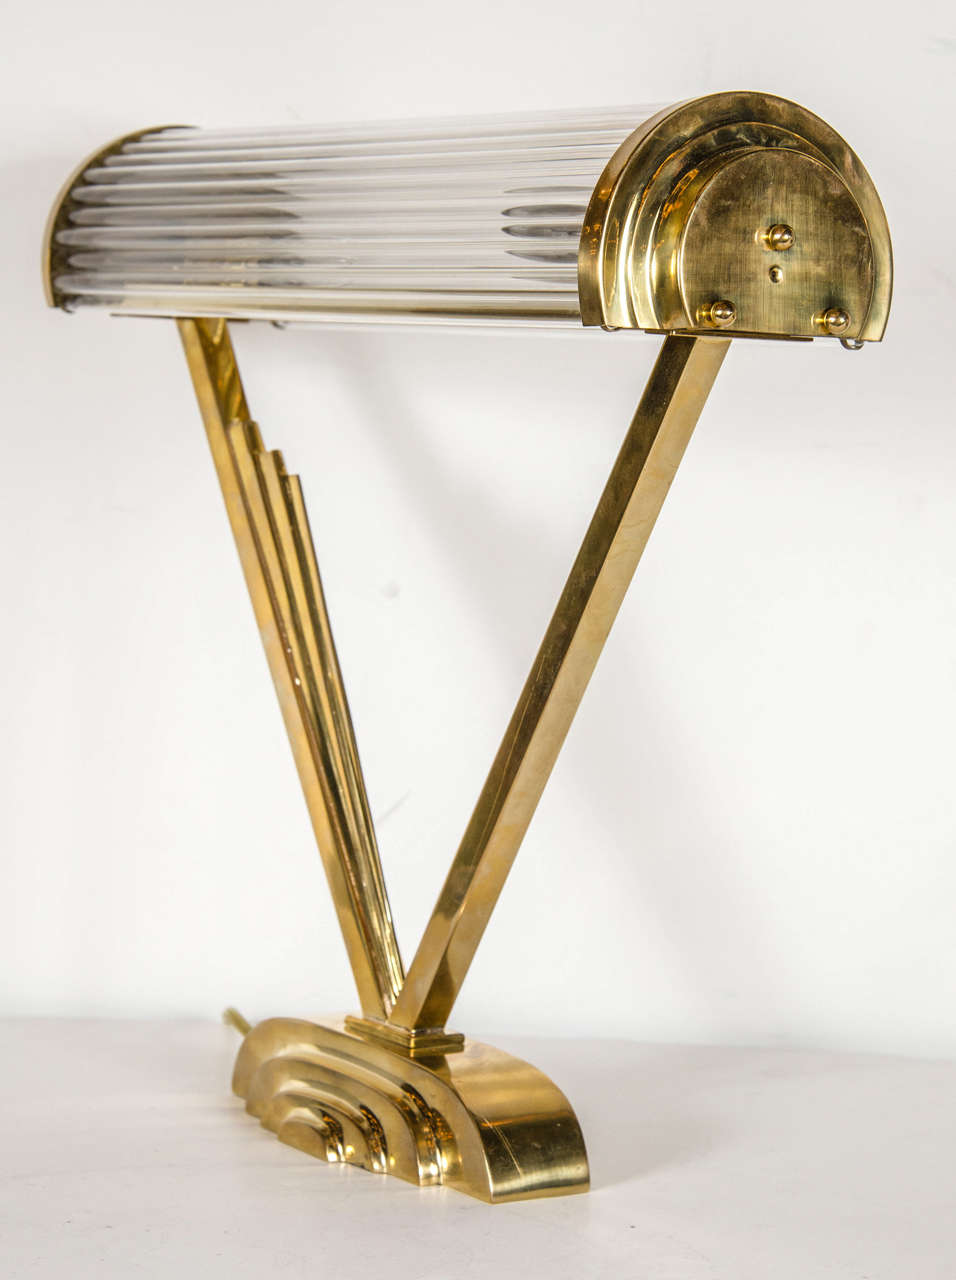 This outstanding Art Deco machine age desk lamp in the manner of Josef Hoffman features a suspended demilune glass rod shade with two candelabrum bulb fittings. The base has streamlined skyscraper style detailing and is newly rewired.